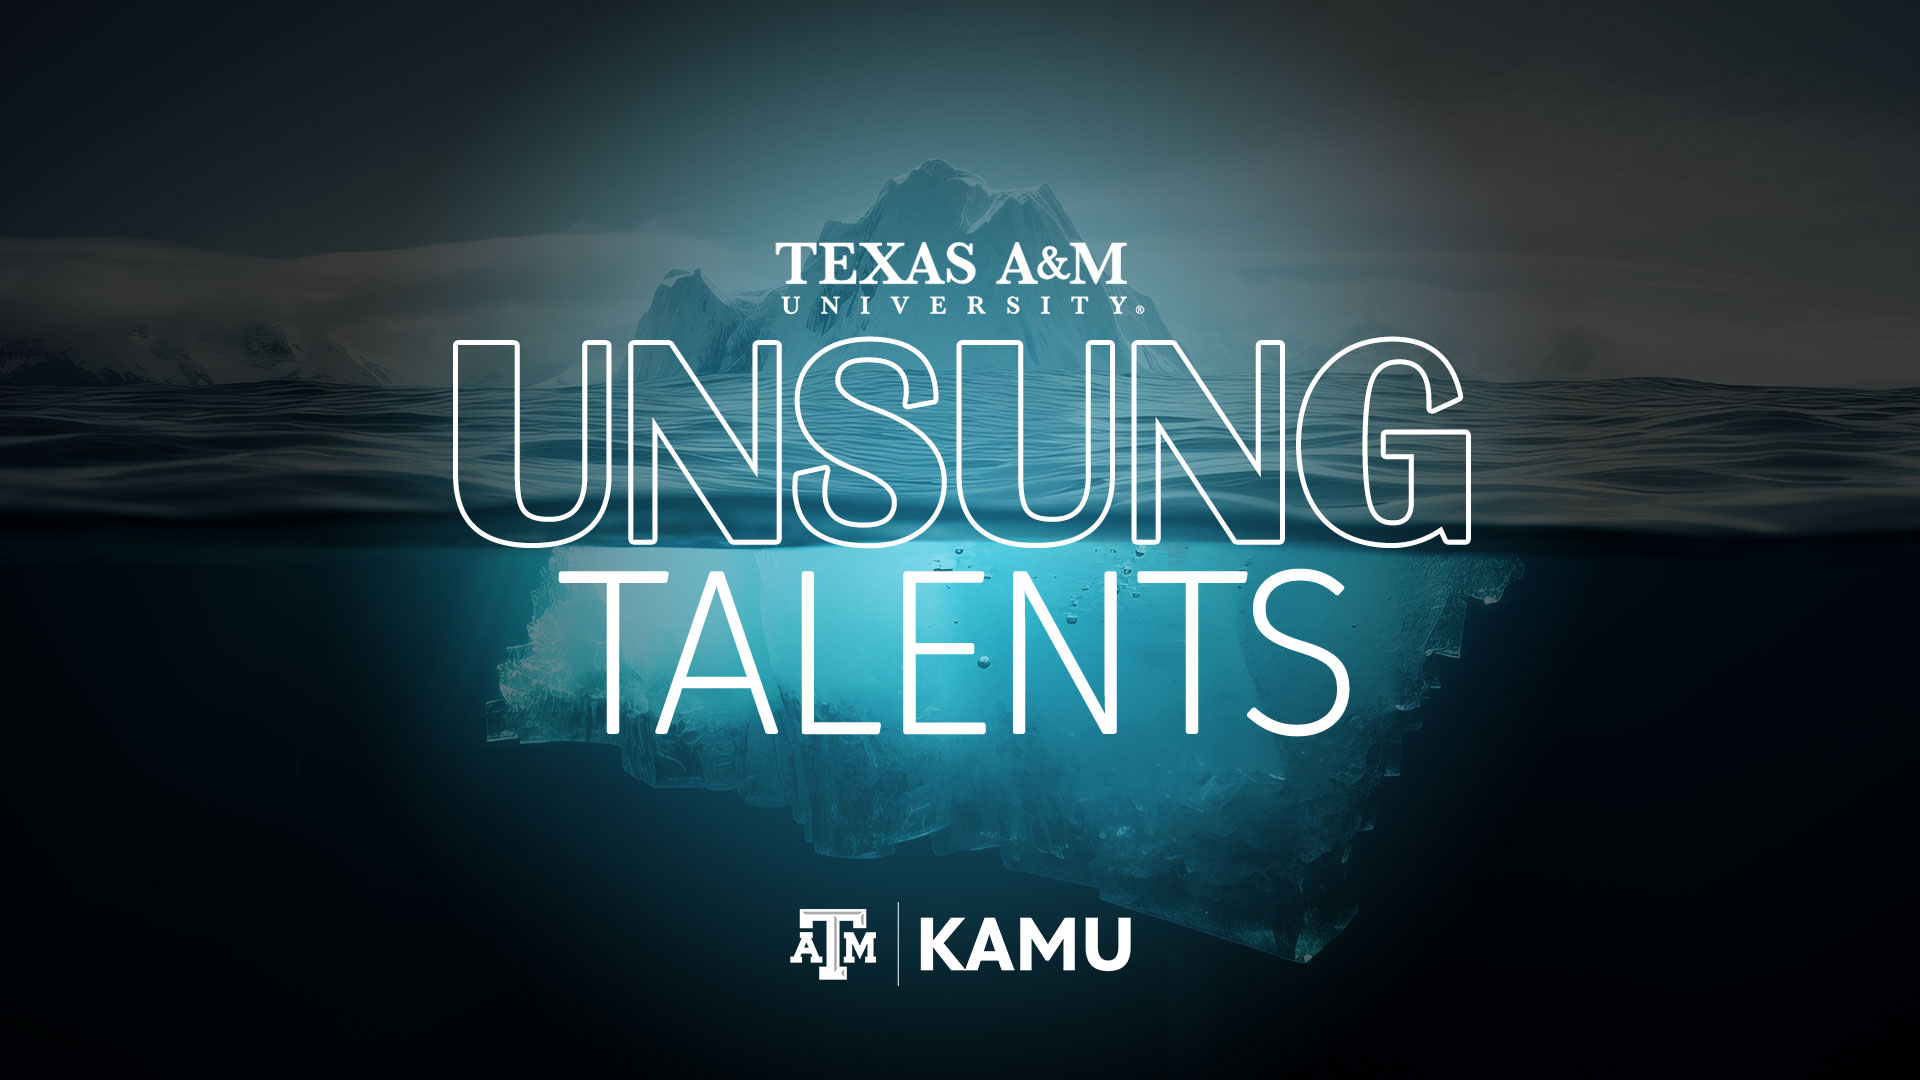 text reading Texas A&M University Unsung Talents from KAMU overlaid over an image of an iceberg.